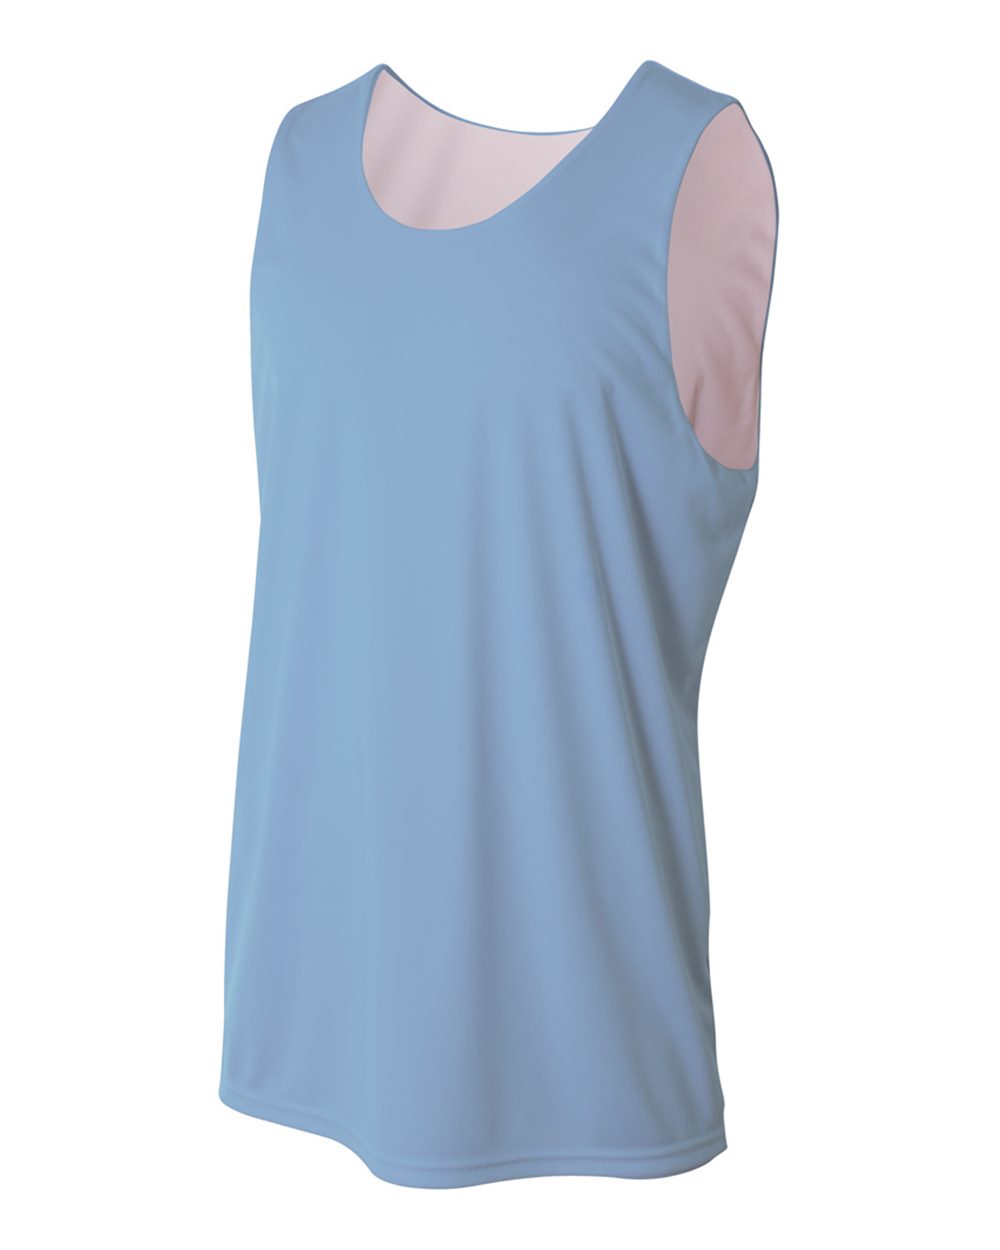 Reversible Basketball Jersey V-Neck with Side Panel #735 - YBA Shirts